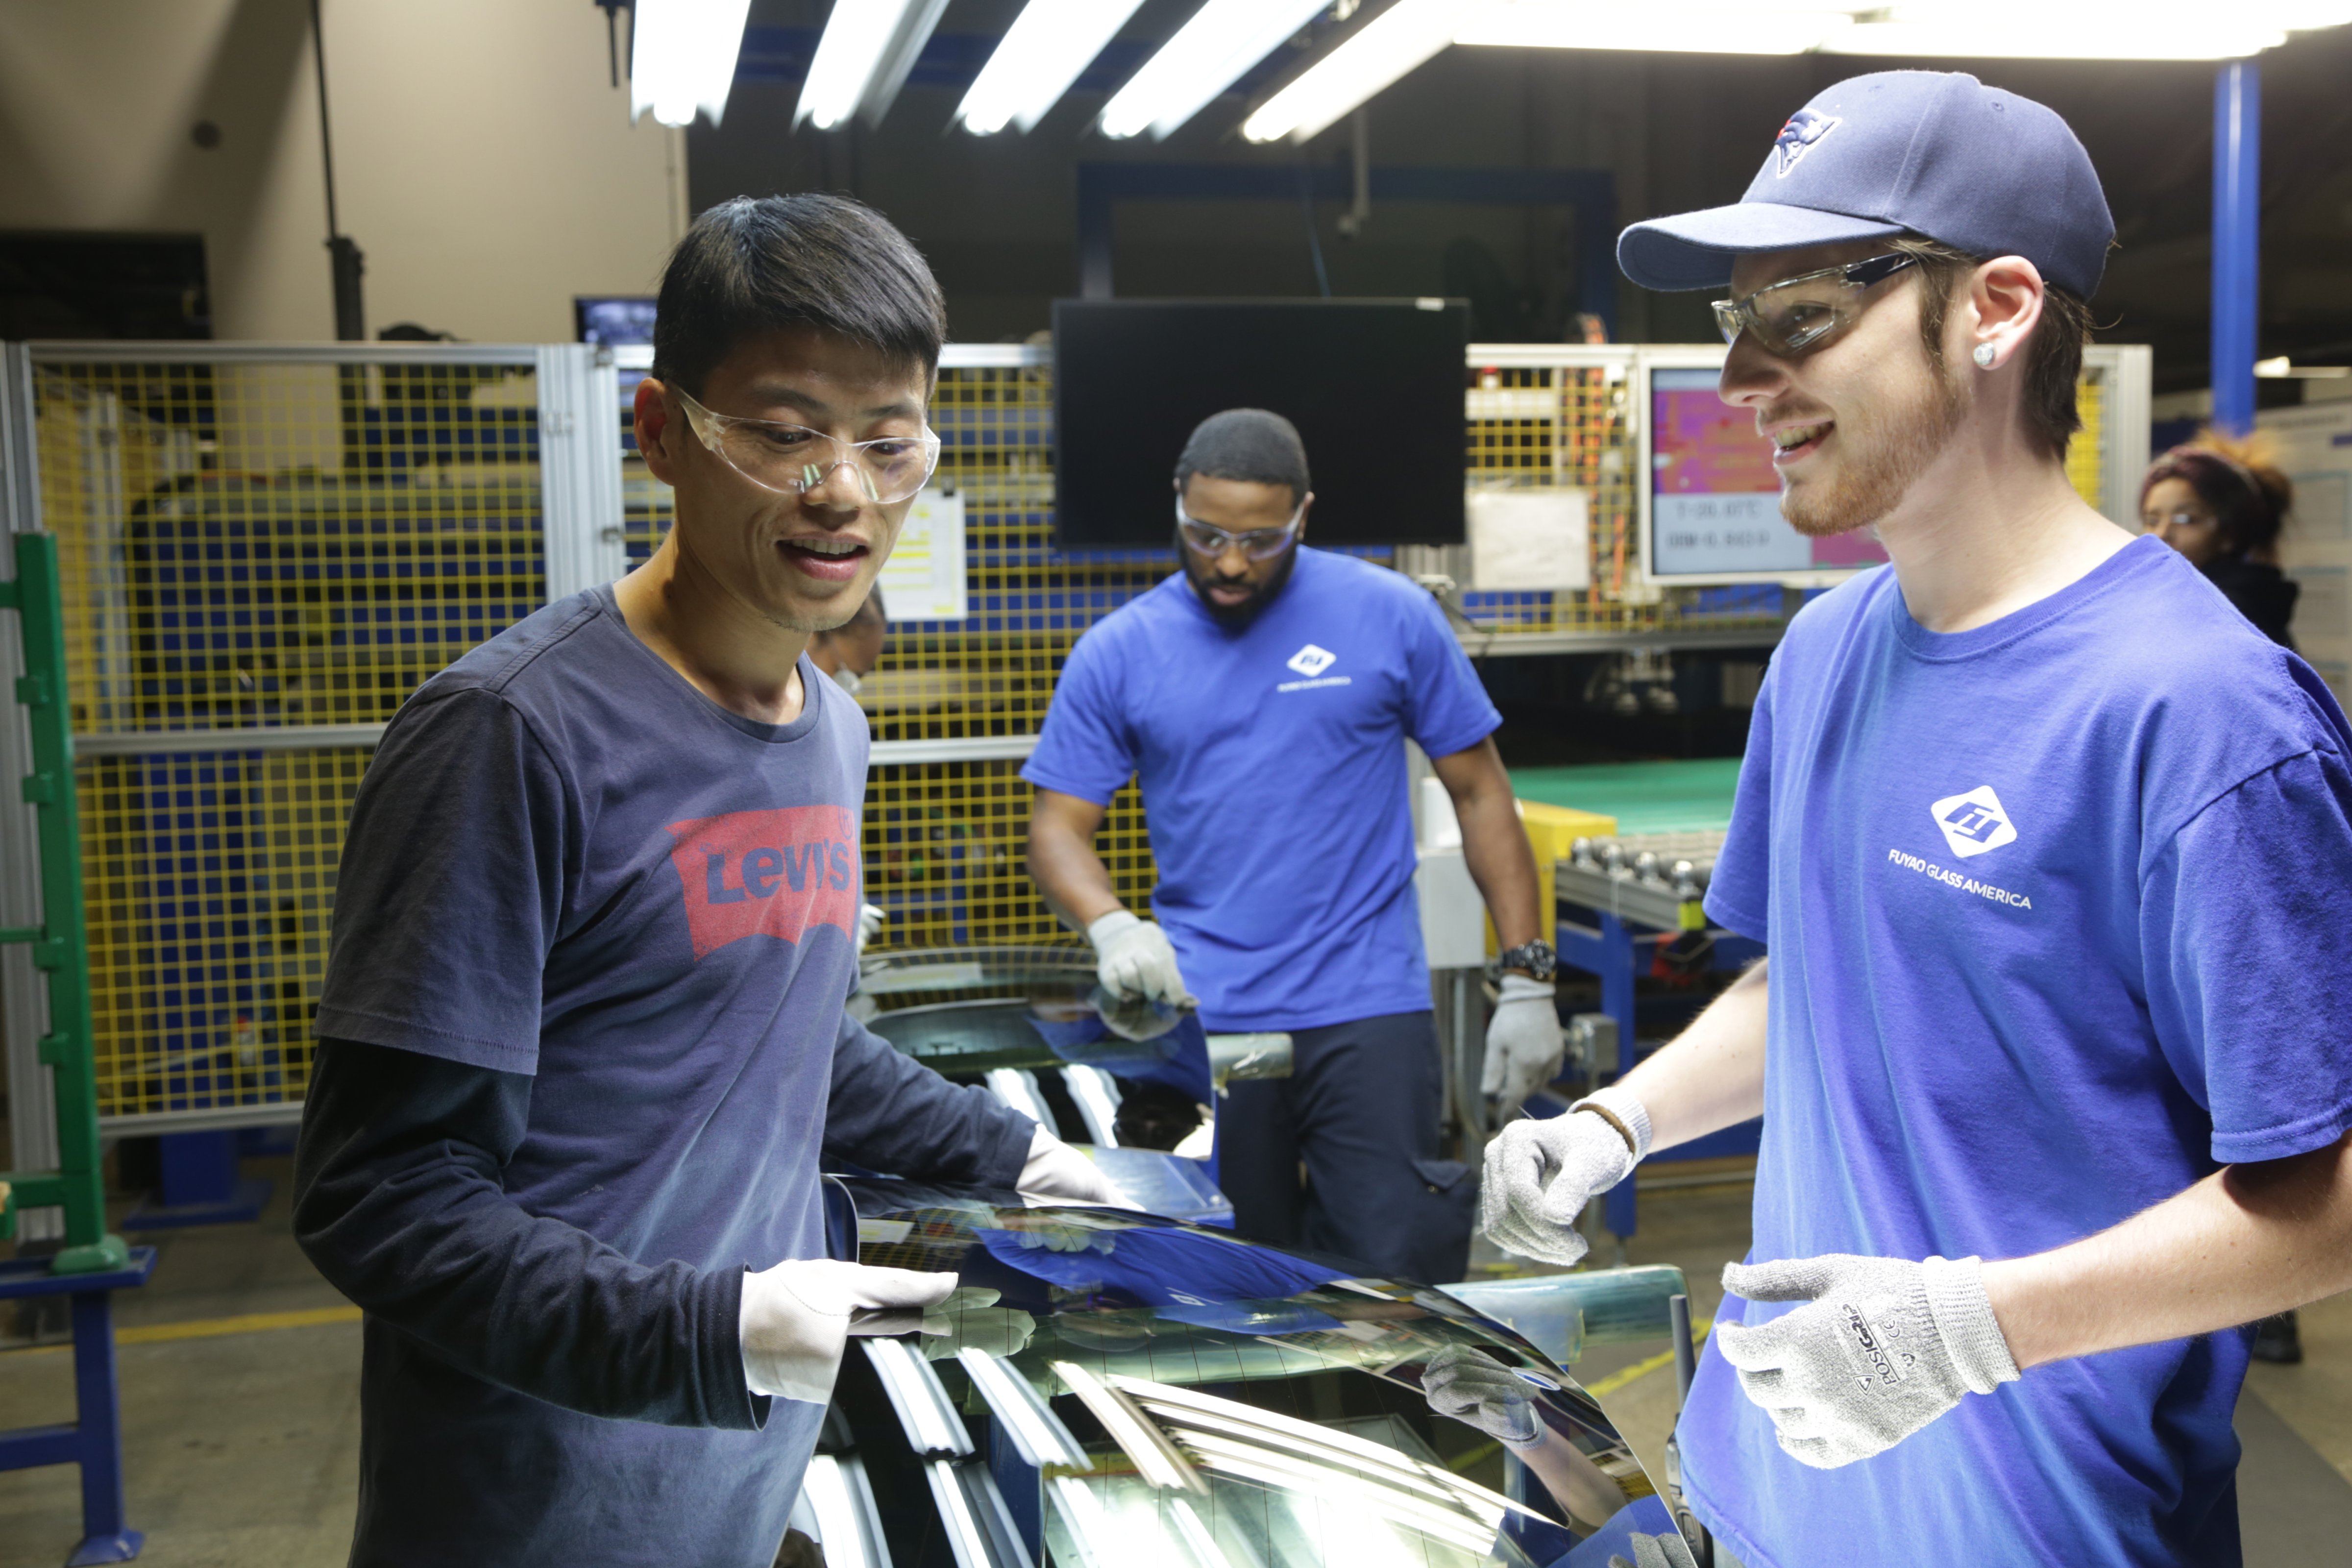 From left, Wong He, Kenny Taylor and Jarred Gibson in "American Factory." (Aubrey Keith/Netflix)